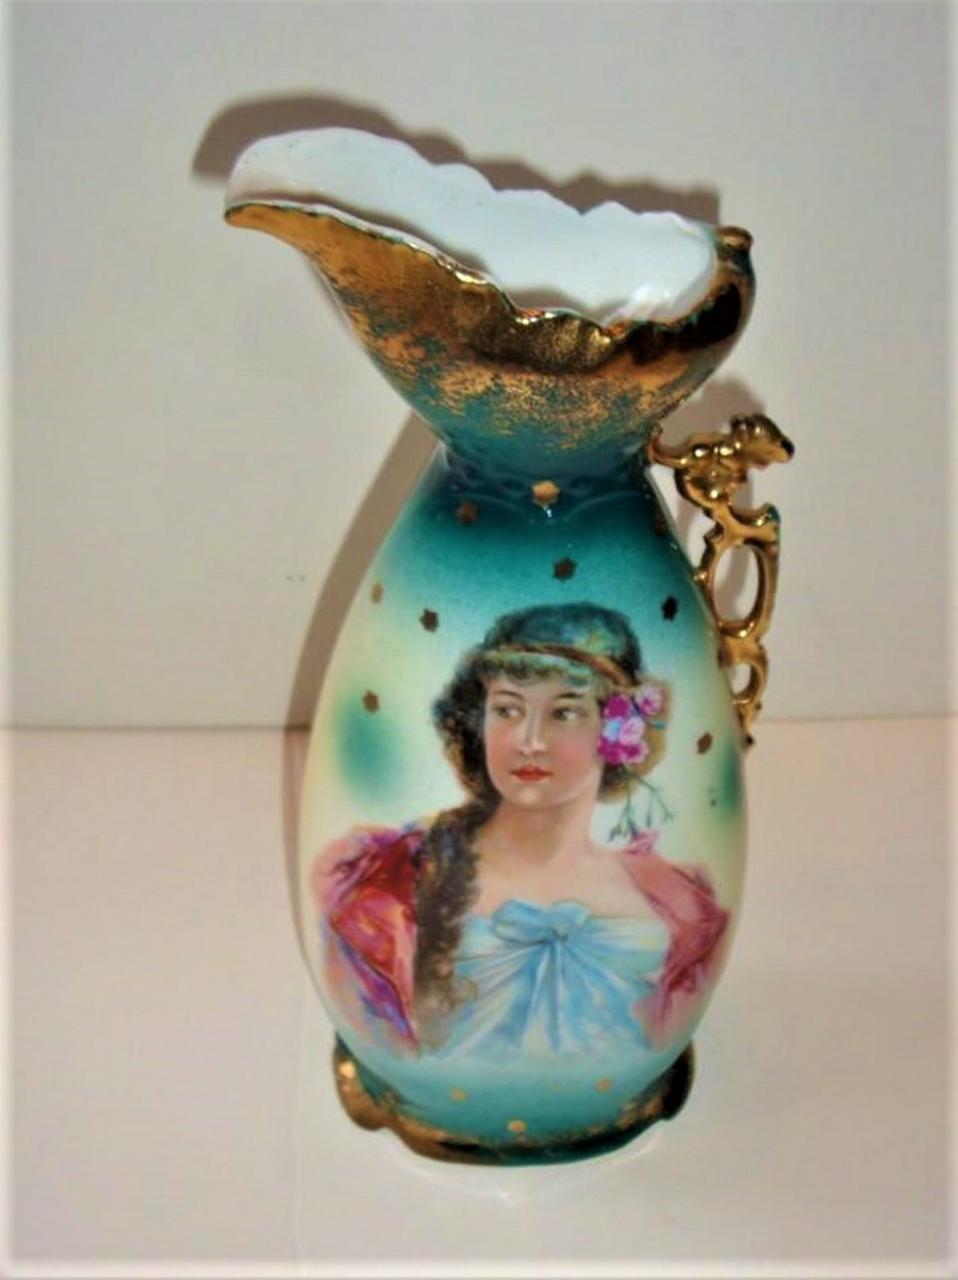   Exquisite 19th C Austrian Handpainted Royal Vienna Lady Vase Urn Pitcher In Good Condition For Sale In New York, NY